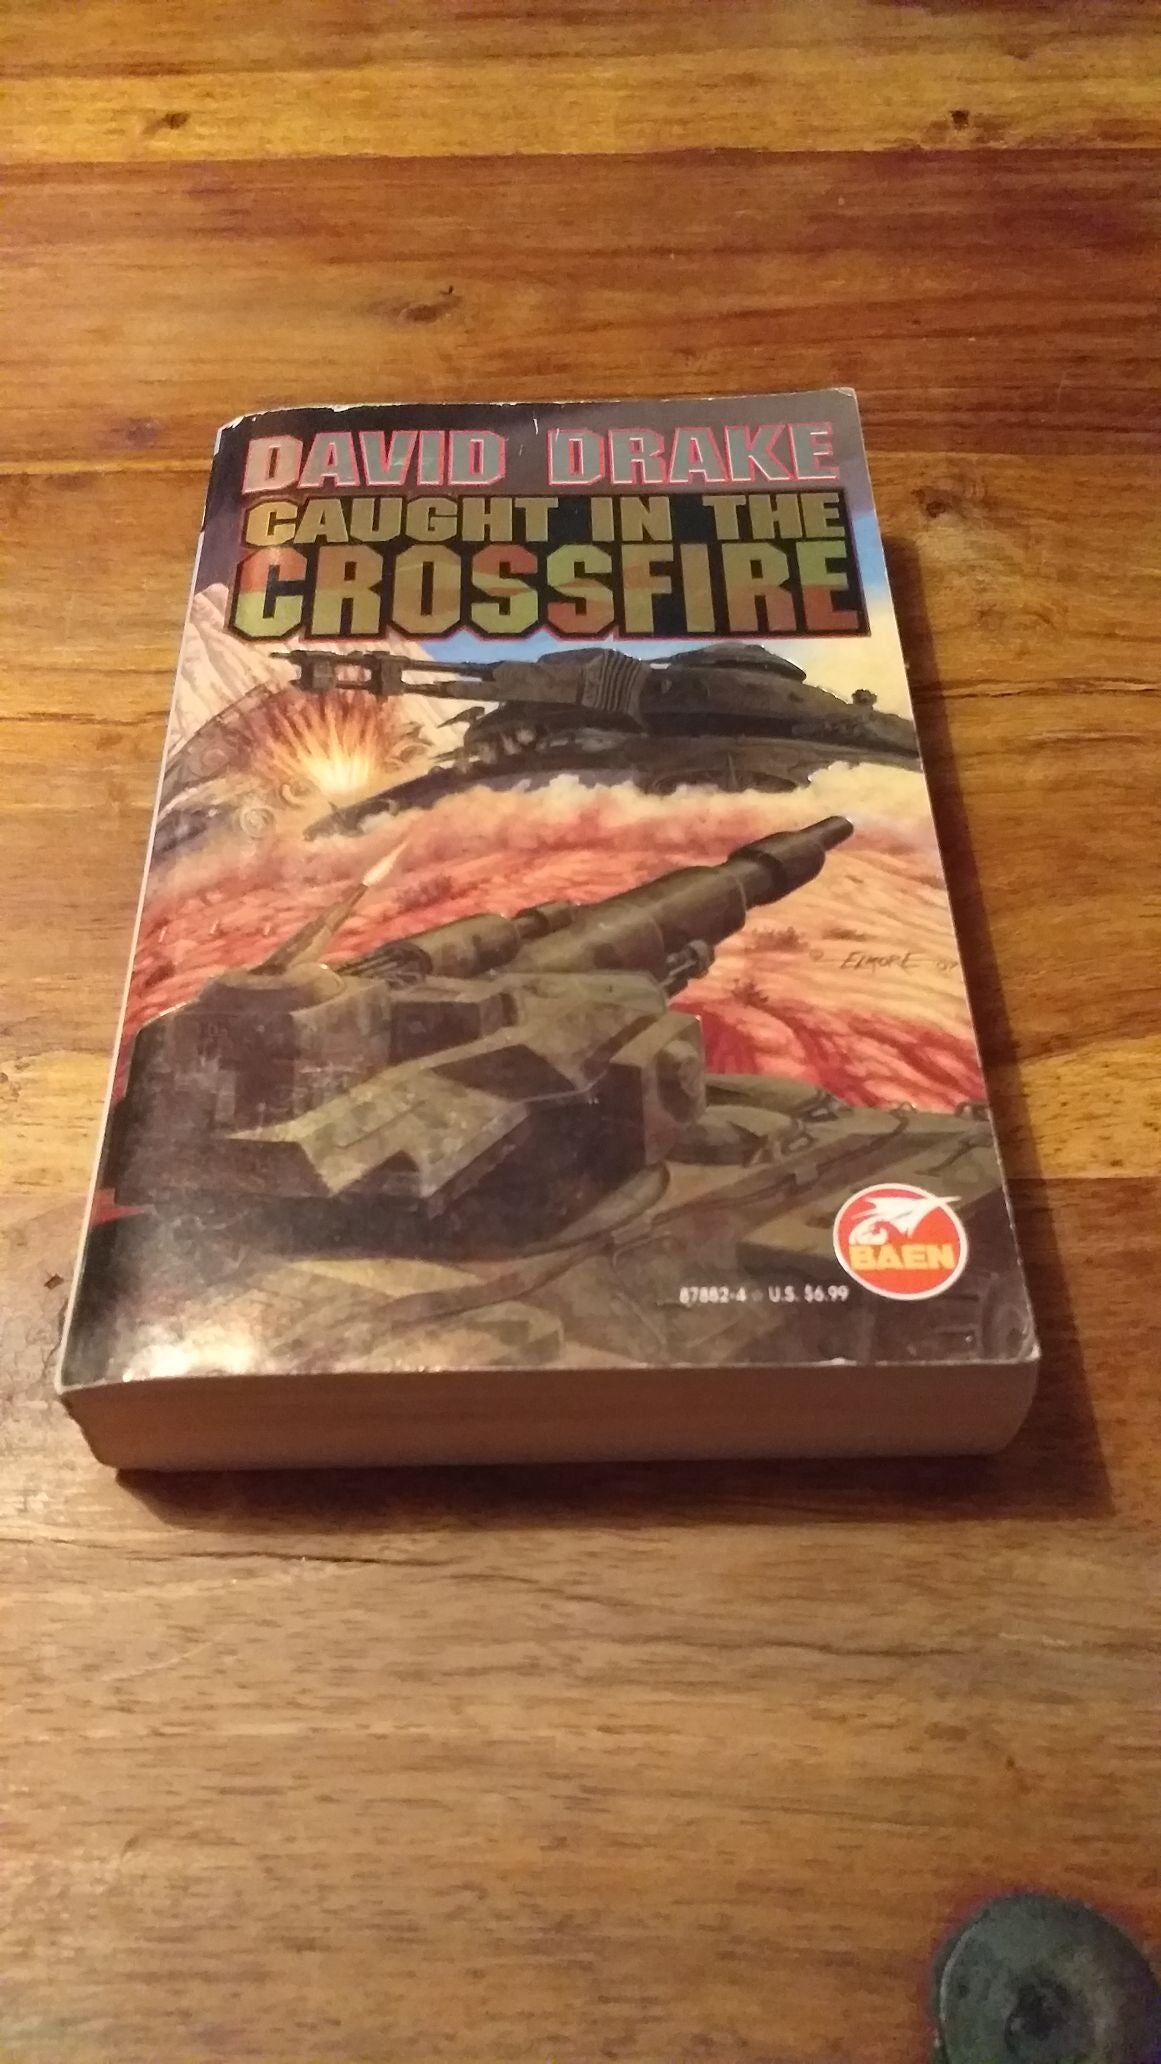 Caught in the Crossfire by David Drake 1998